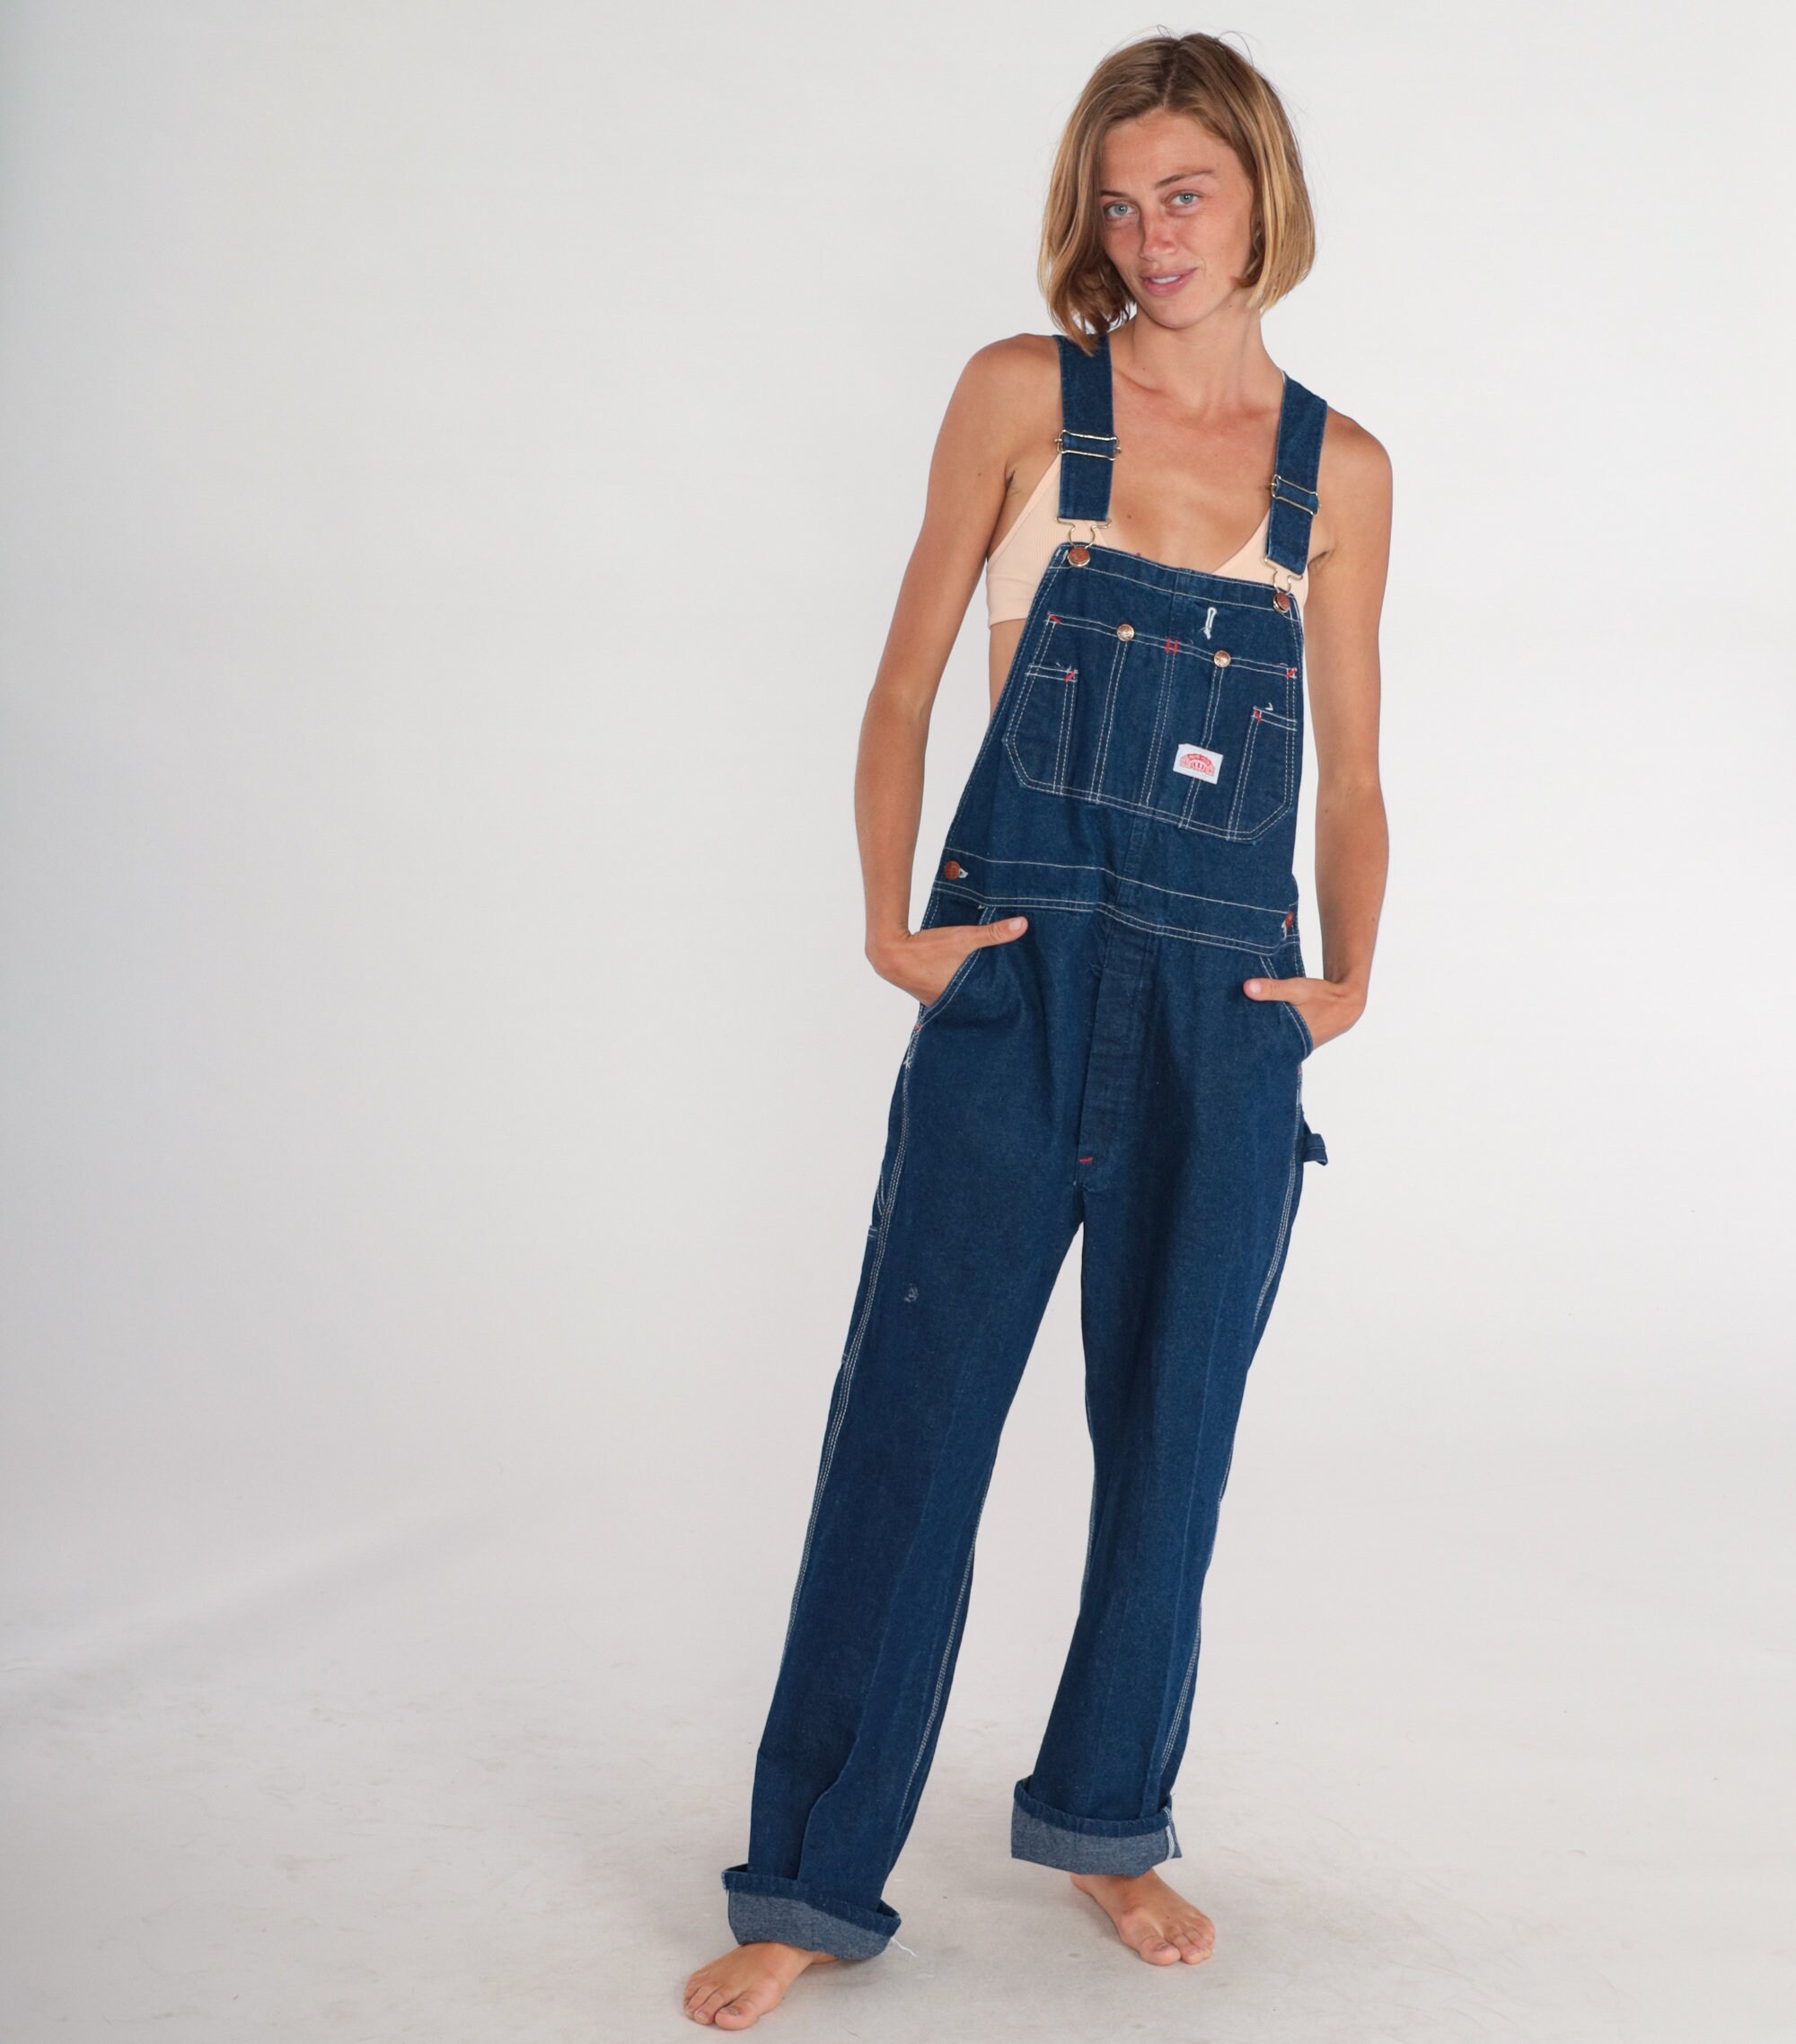 Denim Overalls Y2k Blue Jean Bib Overall Pants Roundhouse Baggy ...